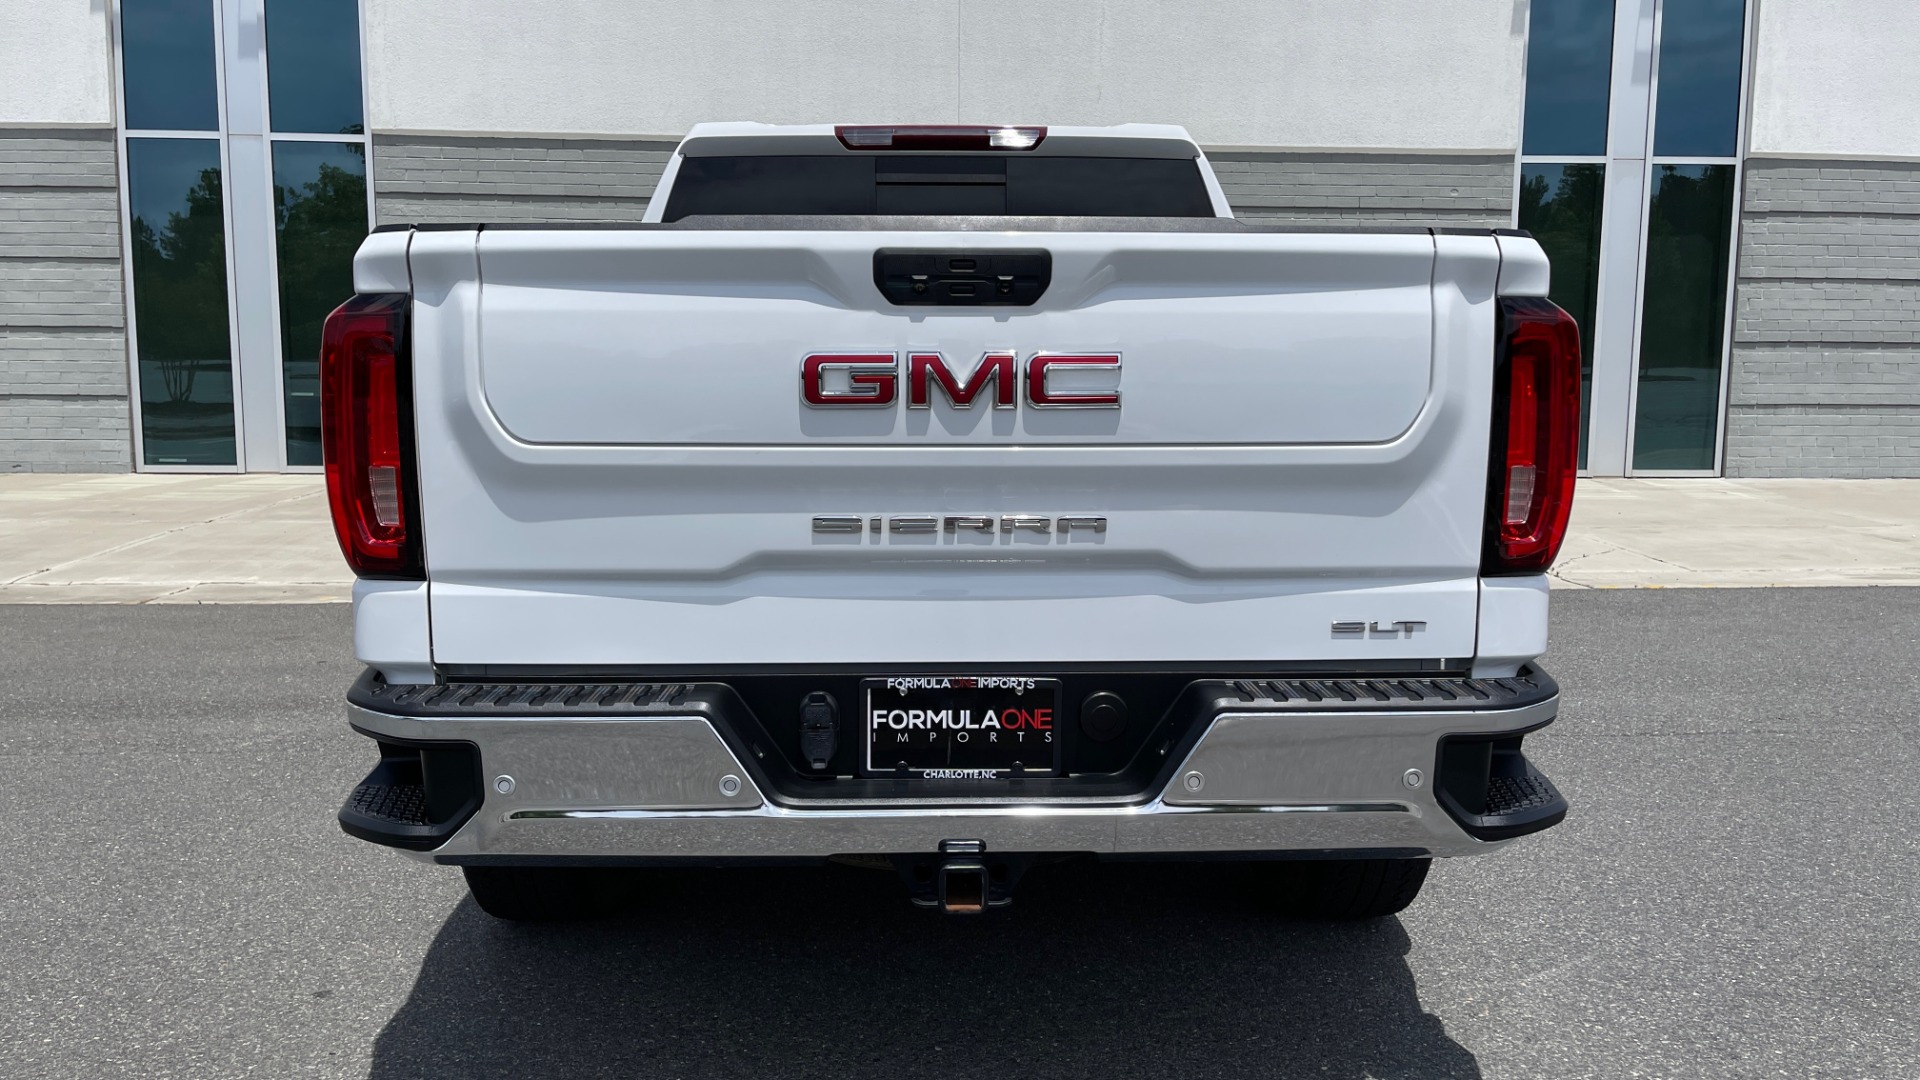 Used 2019 GMC SIERRA 1500 SLT 4X4 CREWCAB / 5.3L V8 / 8-SPD AUTO / NAV / BOSE / REARVIEW for sale Sold at Formula Imports in Charlotte NC 28227 19